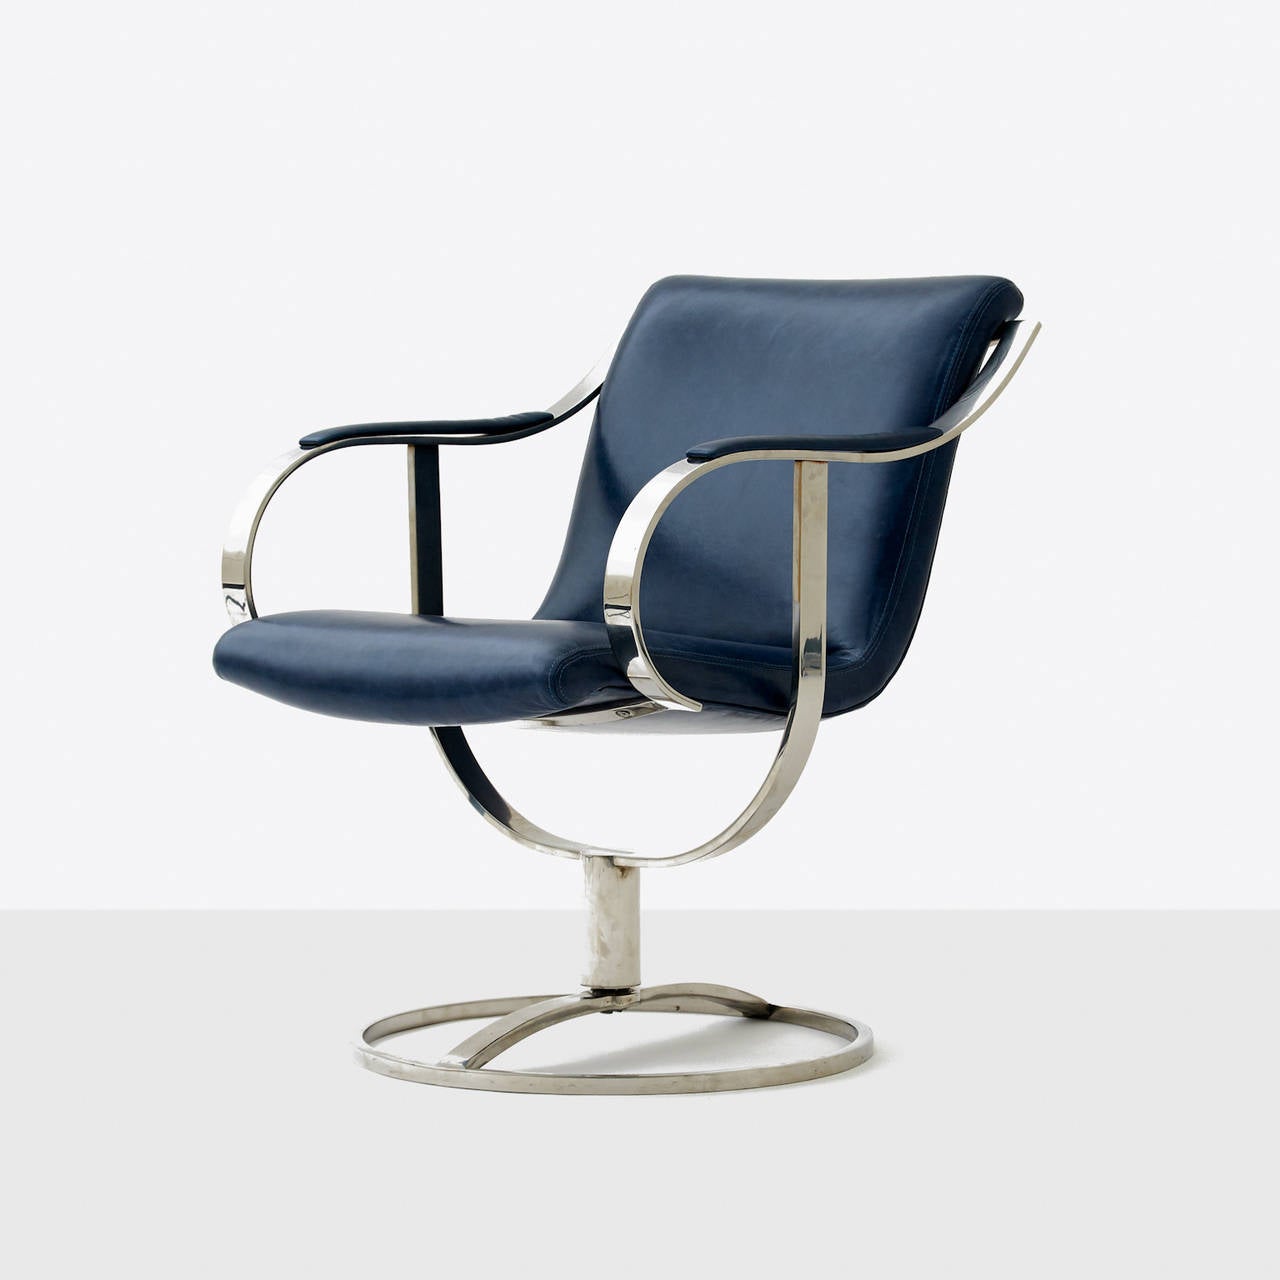 A set of four 450 series chairs by Gardner Leaver for Steelcase. Newly restored in a deep sea blue jerry pair of leather swivel base in chrome-plated steel.